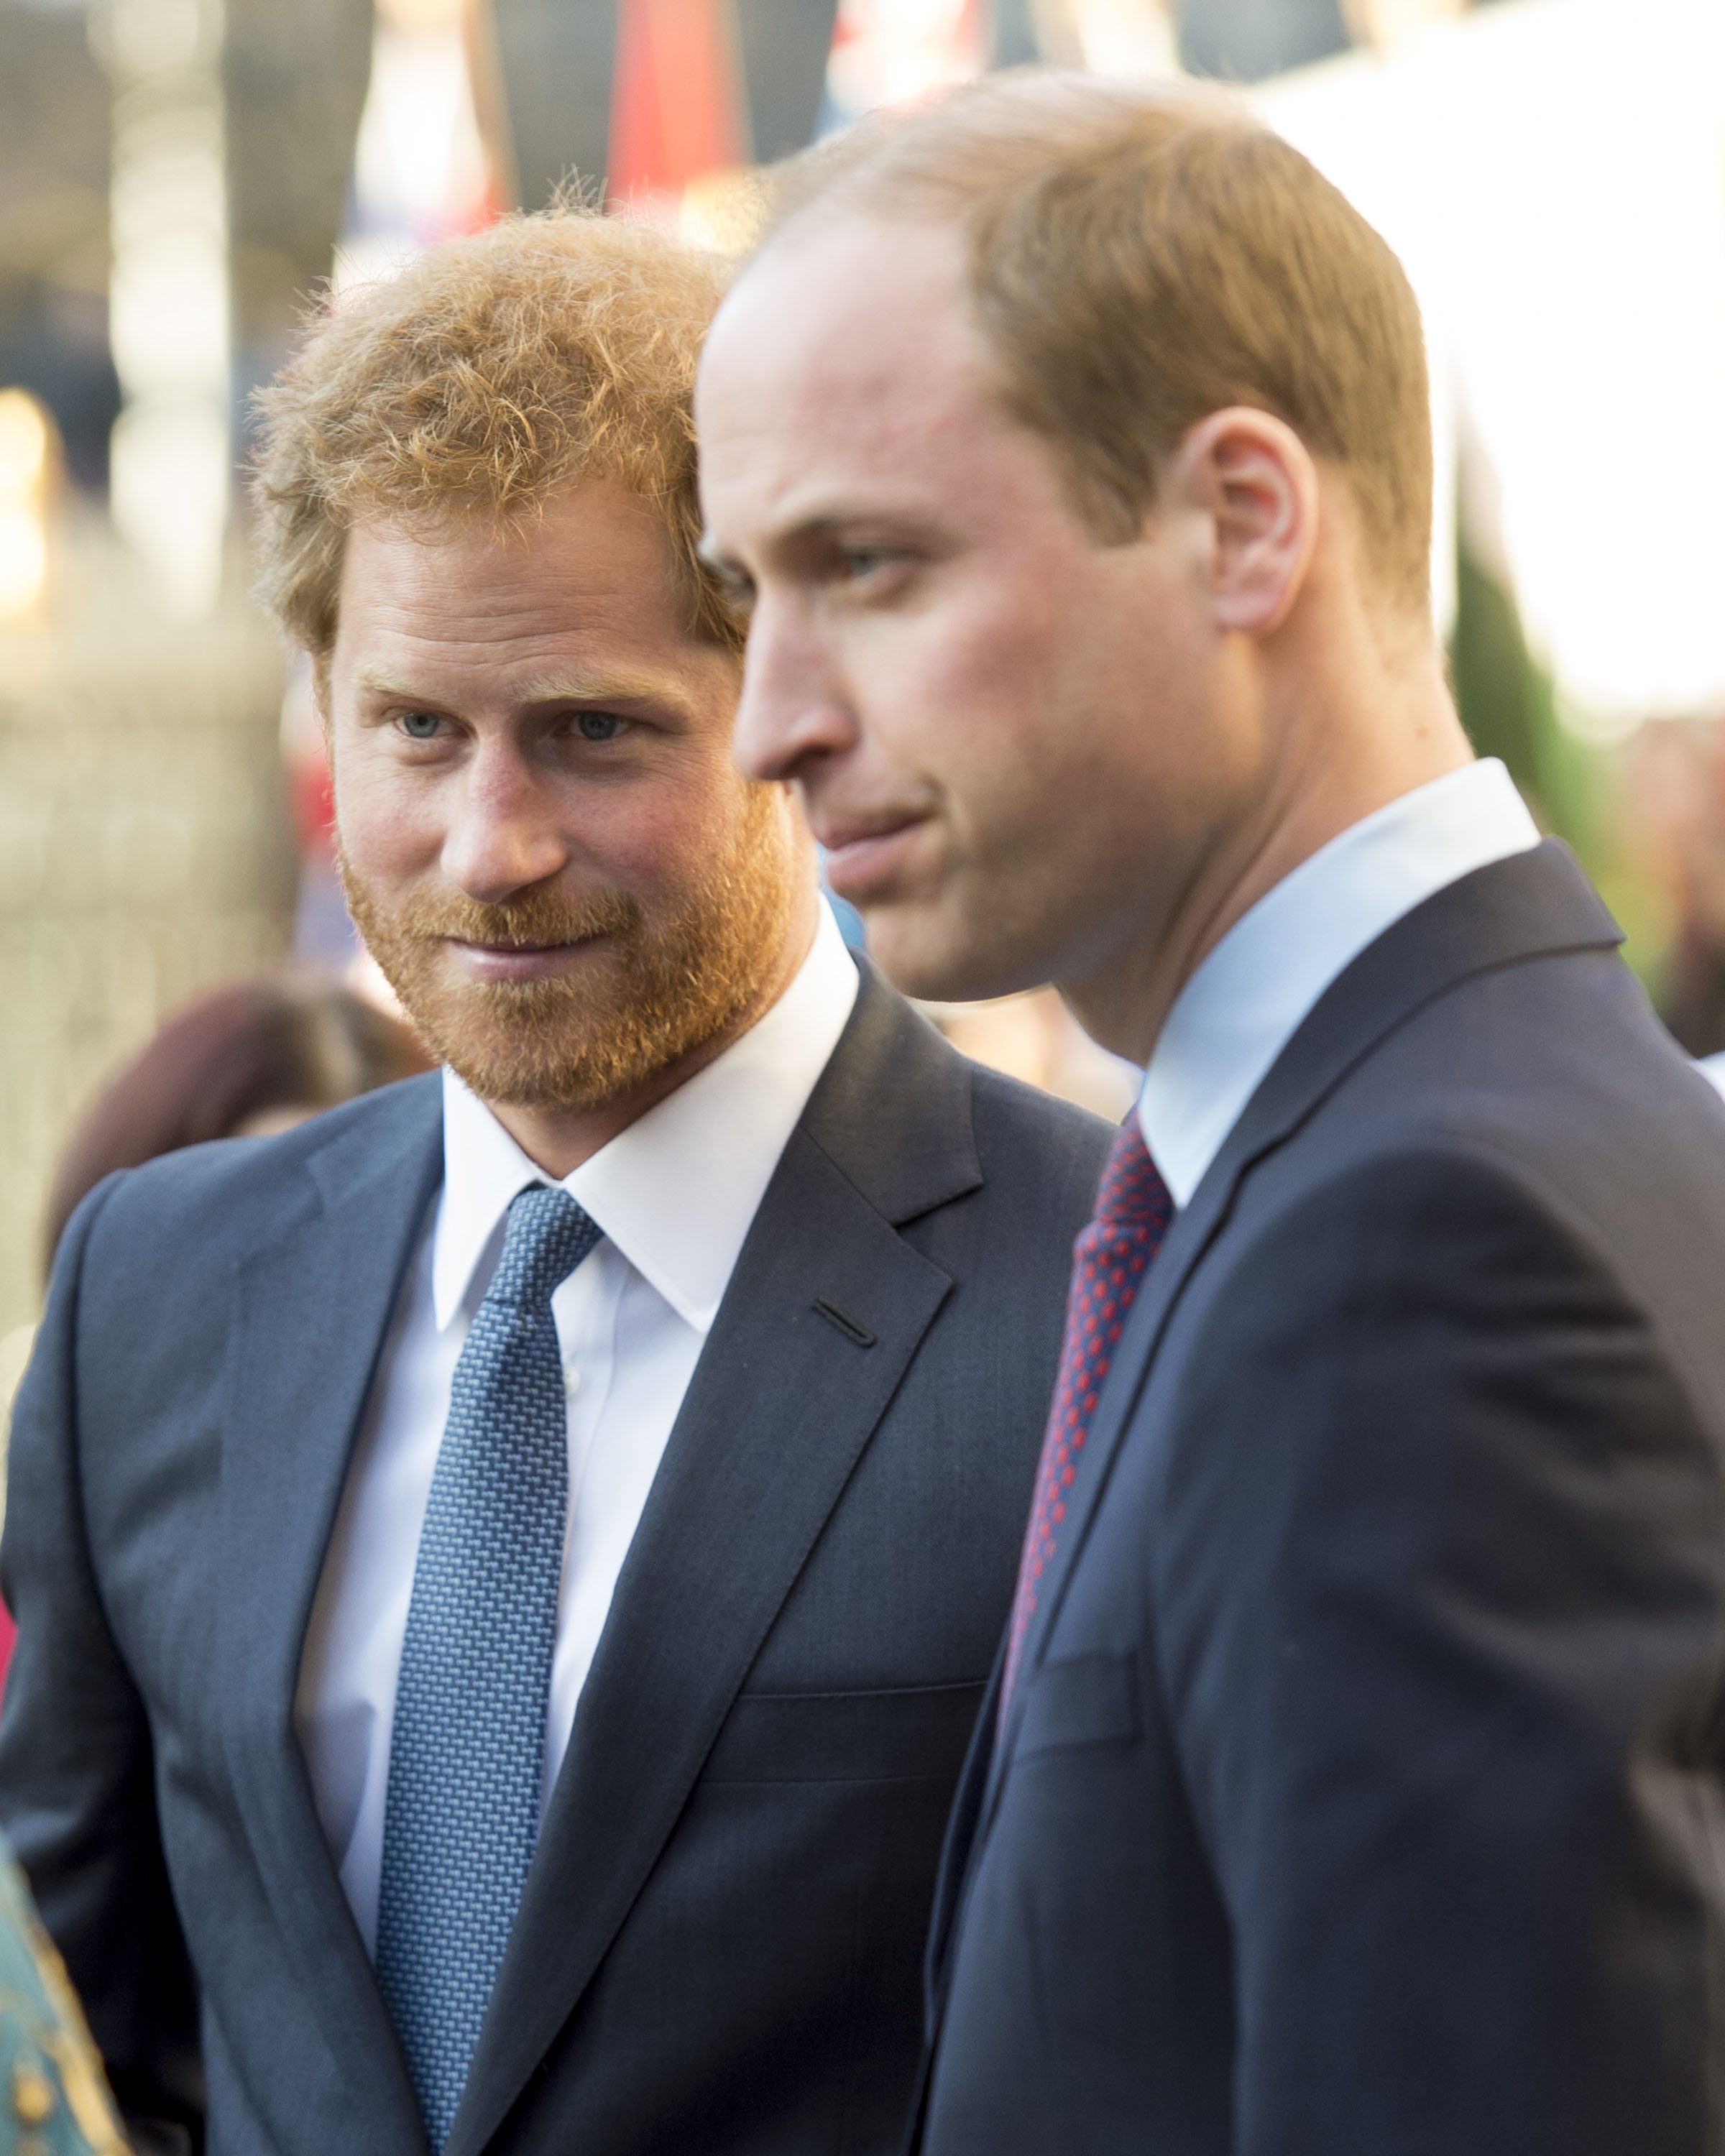 Prince Harry and Prince William attend the Commonwealth Observance Day Service on March 14, 2016 in London, United Kingdom | Photo: Getty Images